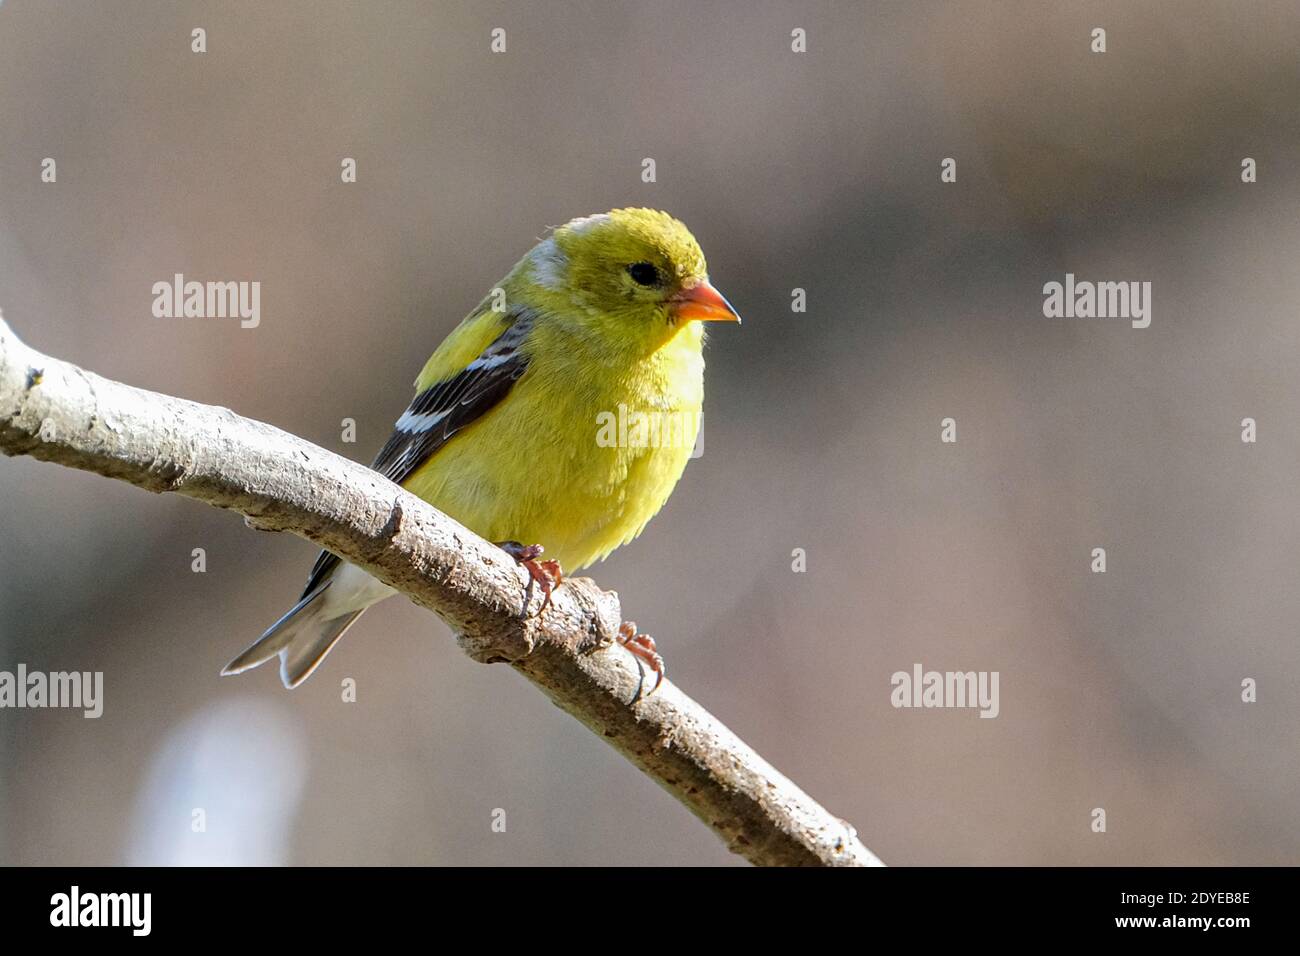 An American goldfinch Stock Photo